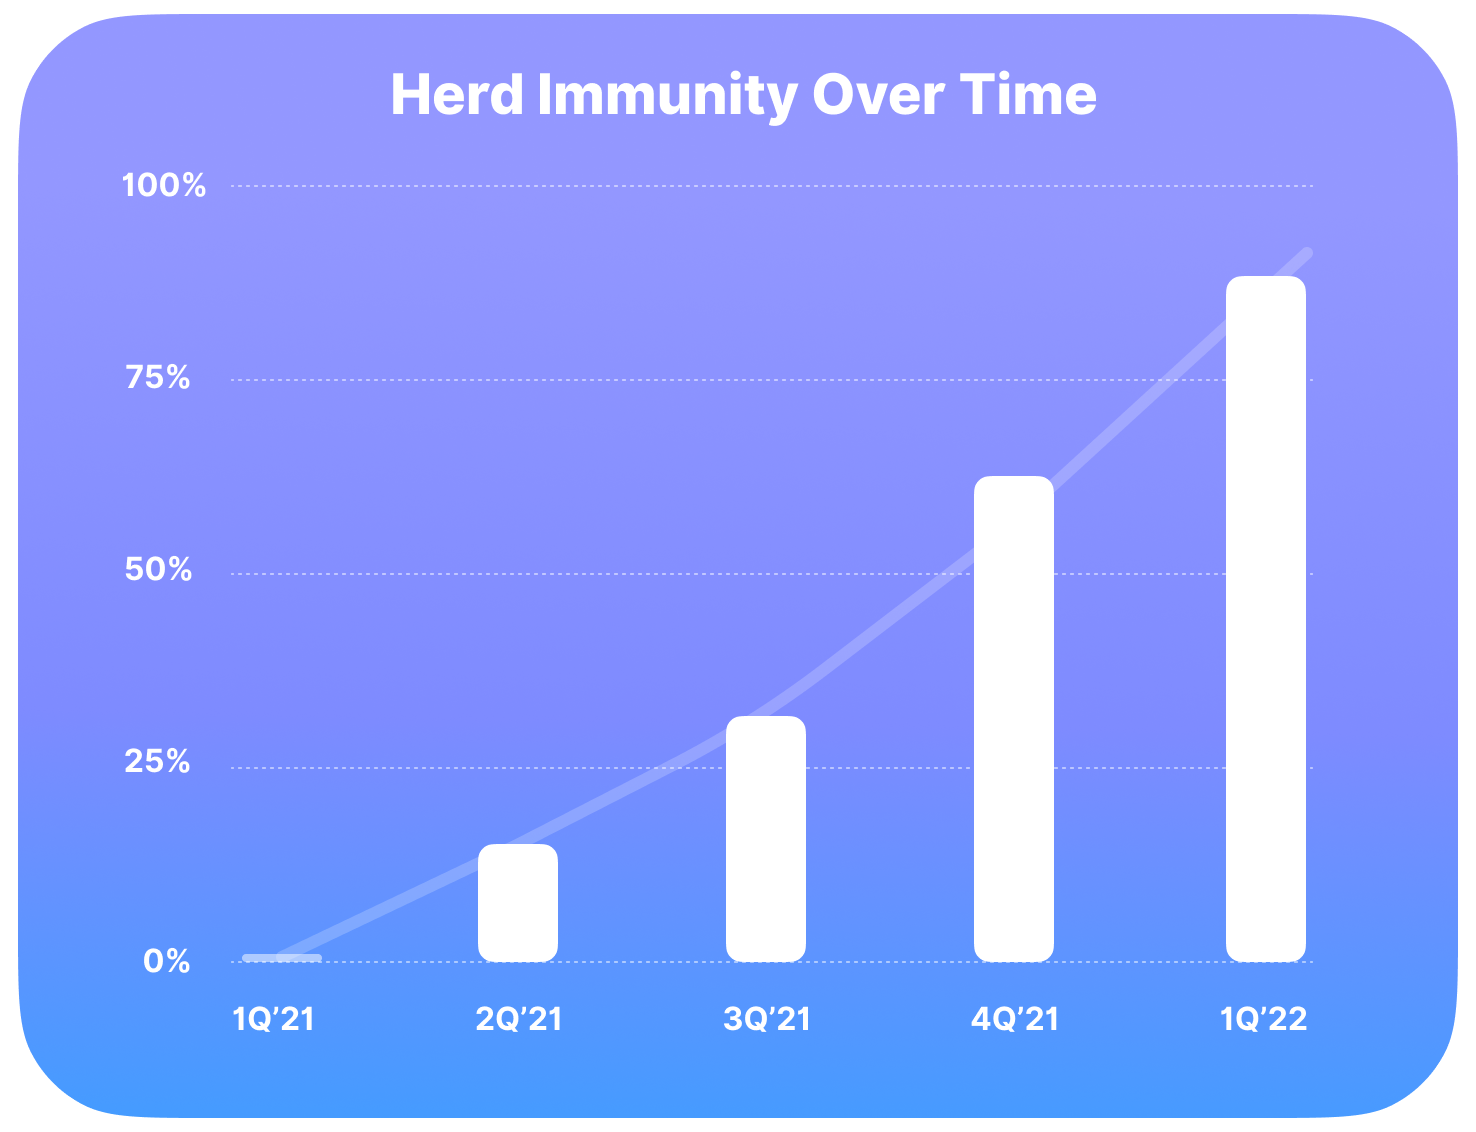 Workplace vaccination advocacy campaigns need to be implemented, a key program to successfully achieving herd immunity.